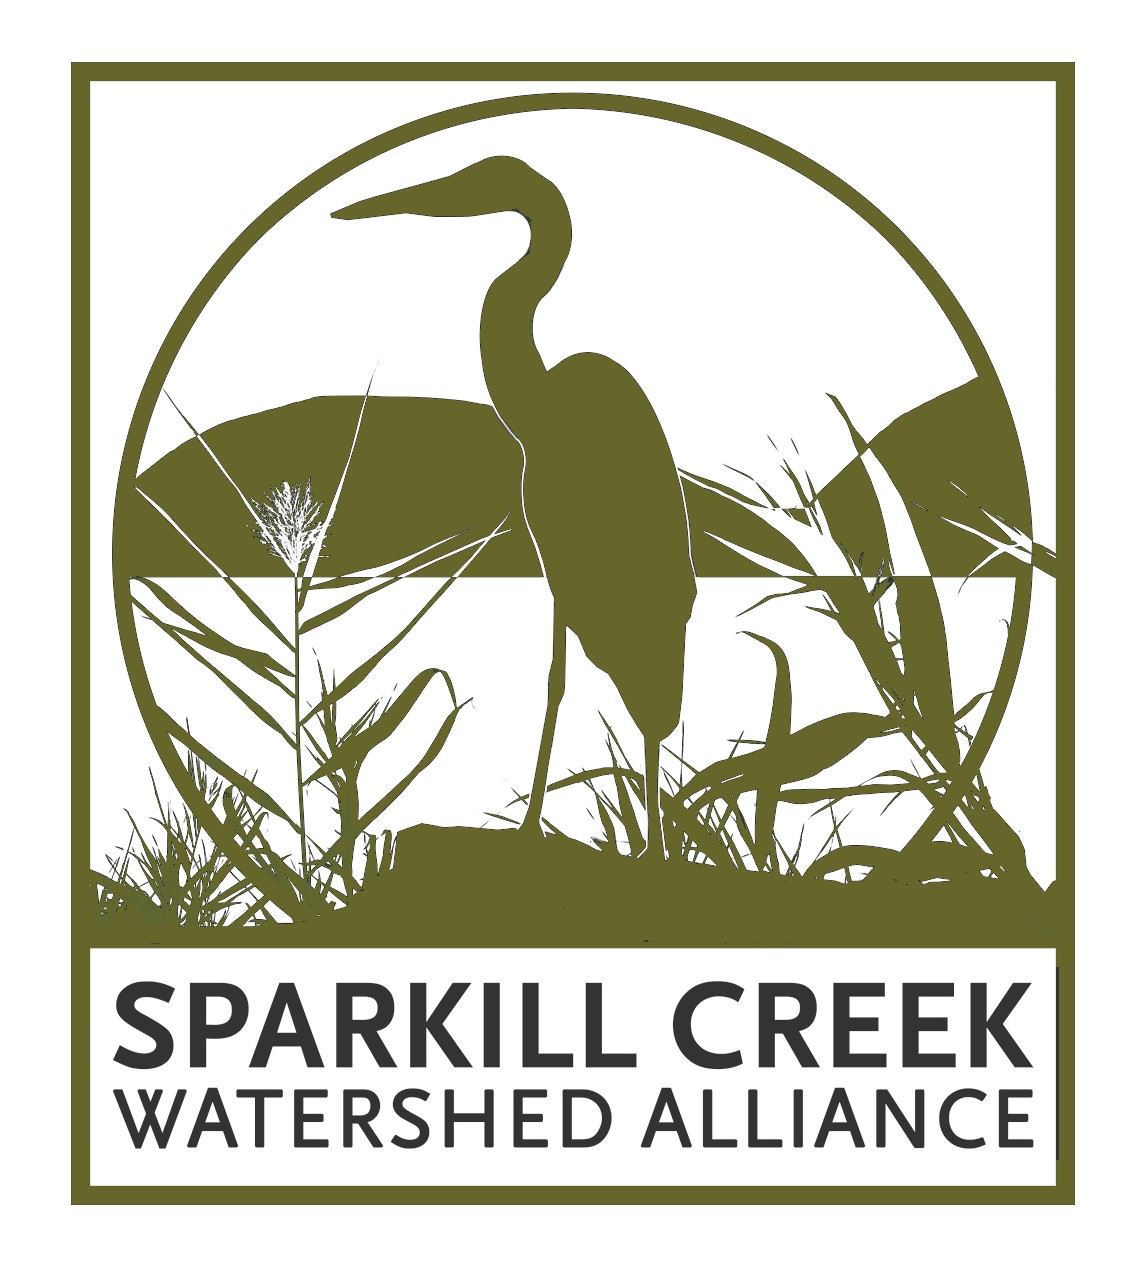 Sparkill Creek Watershed Alliance